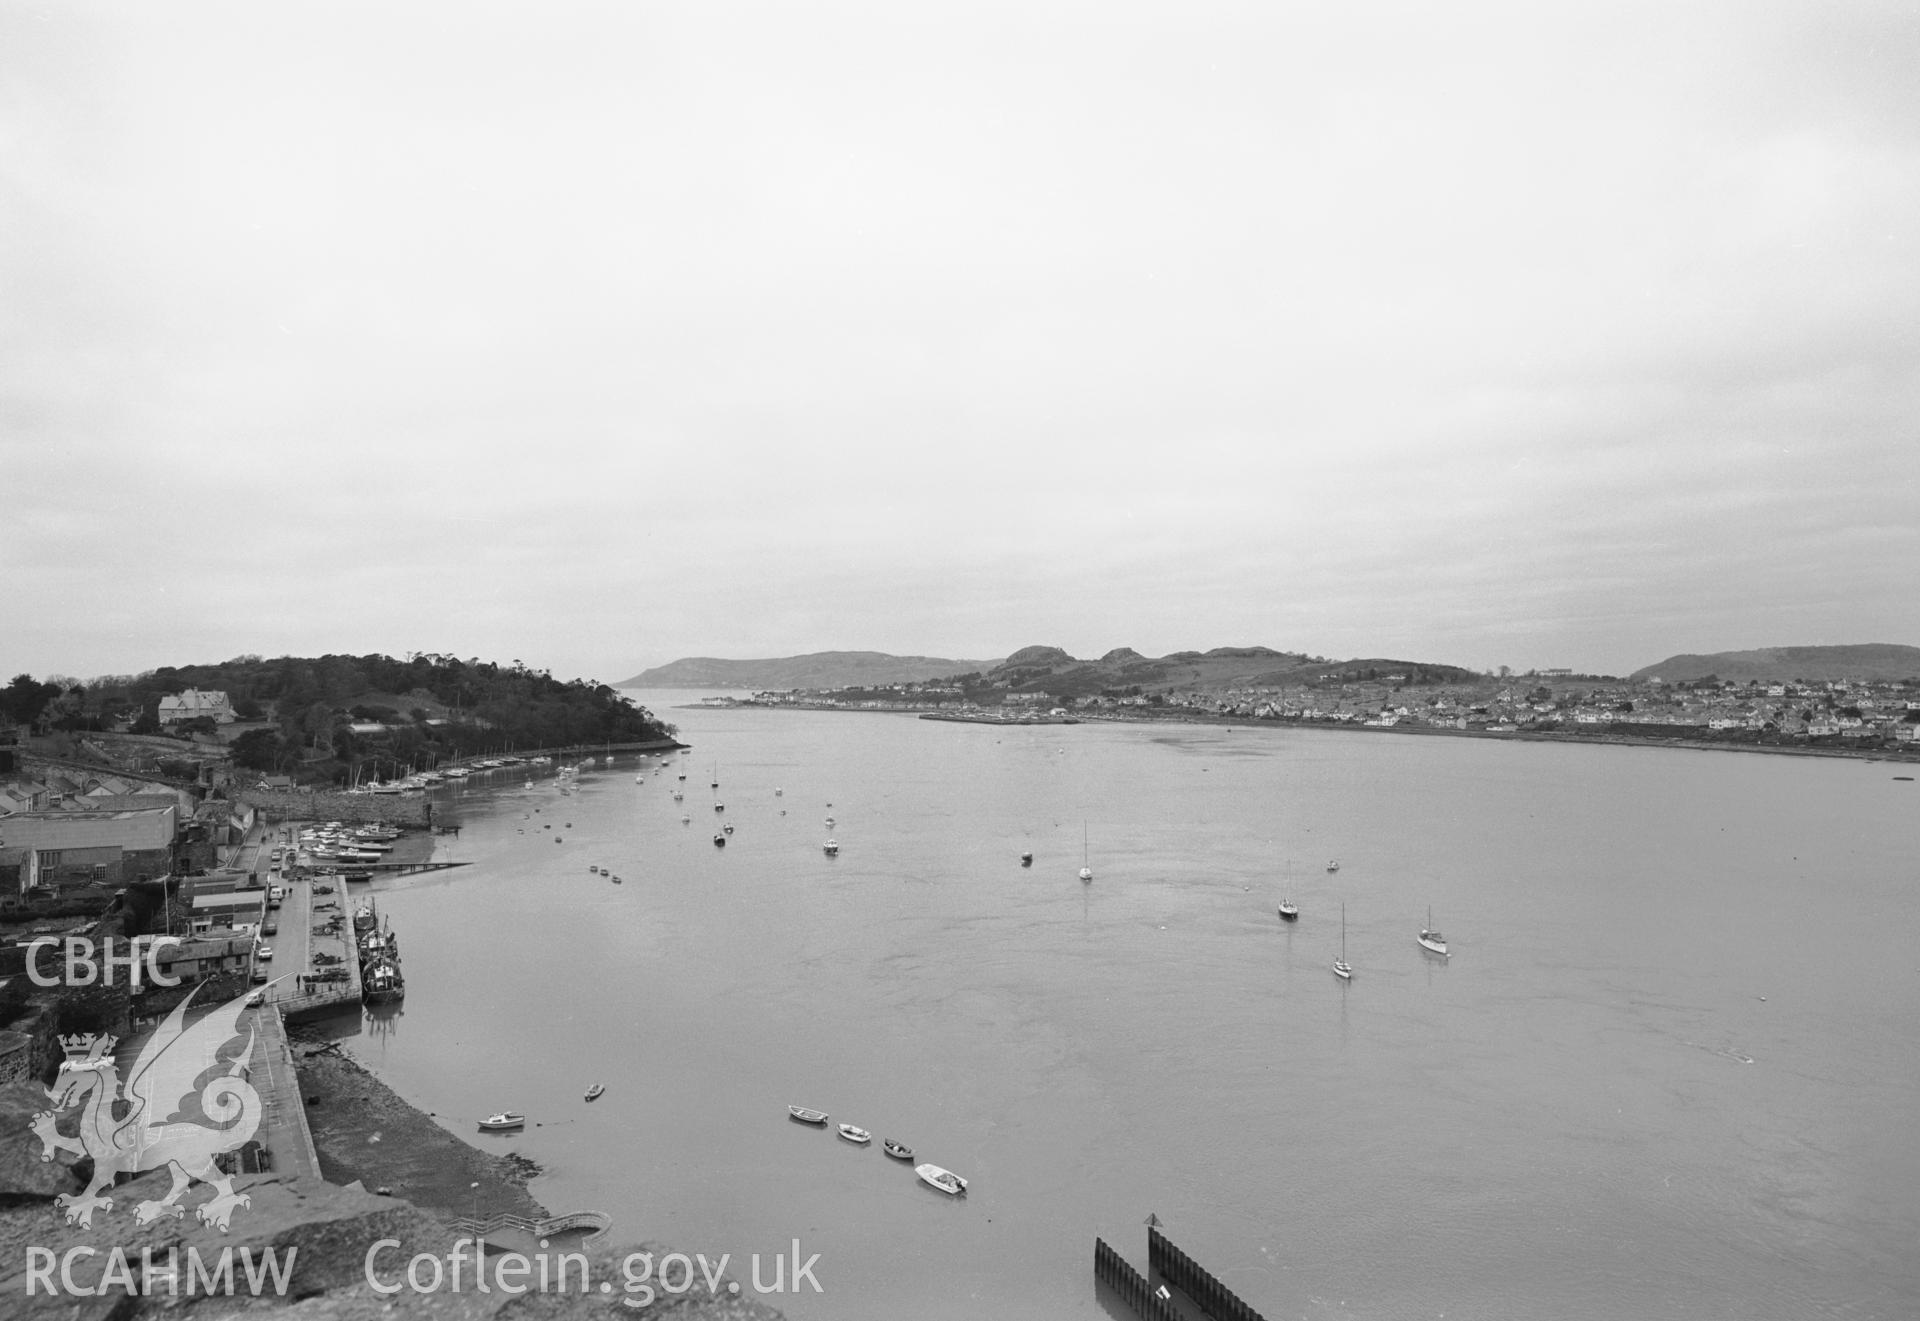 Photographic negative showing view of Conwy; collated by the former Central Office of Information.